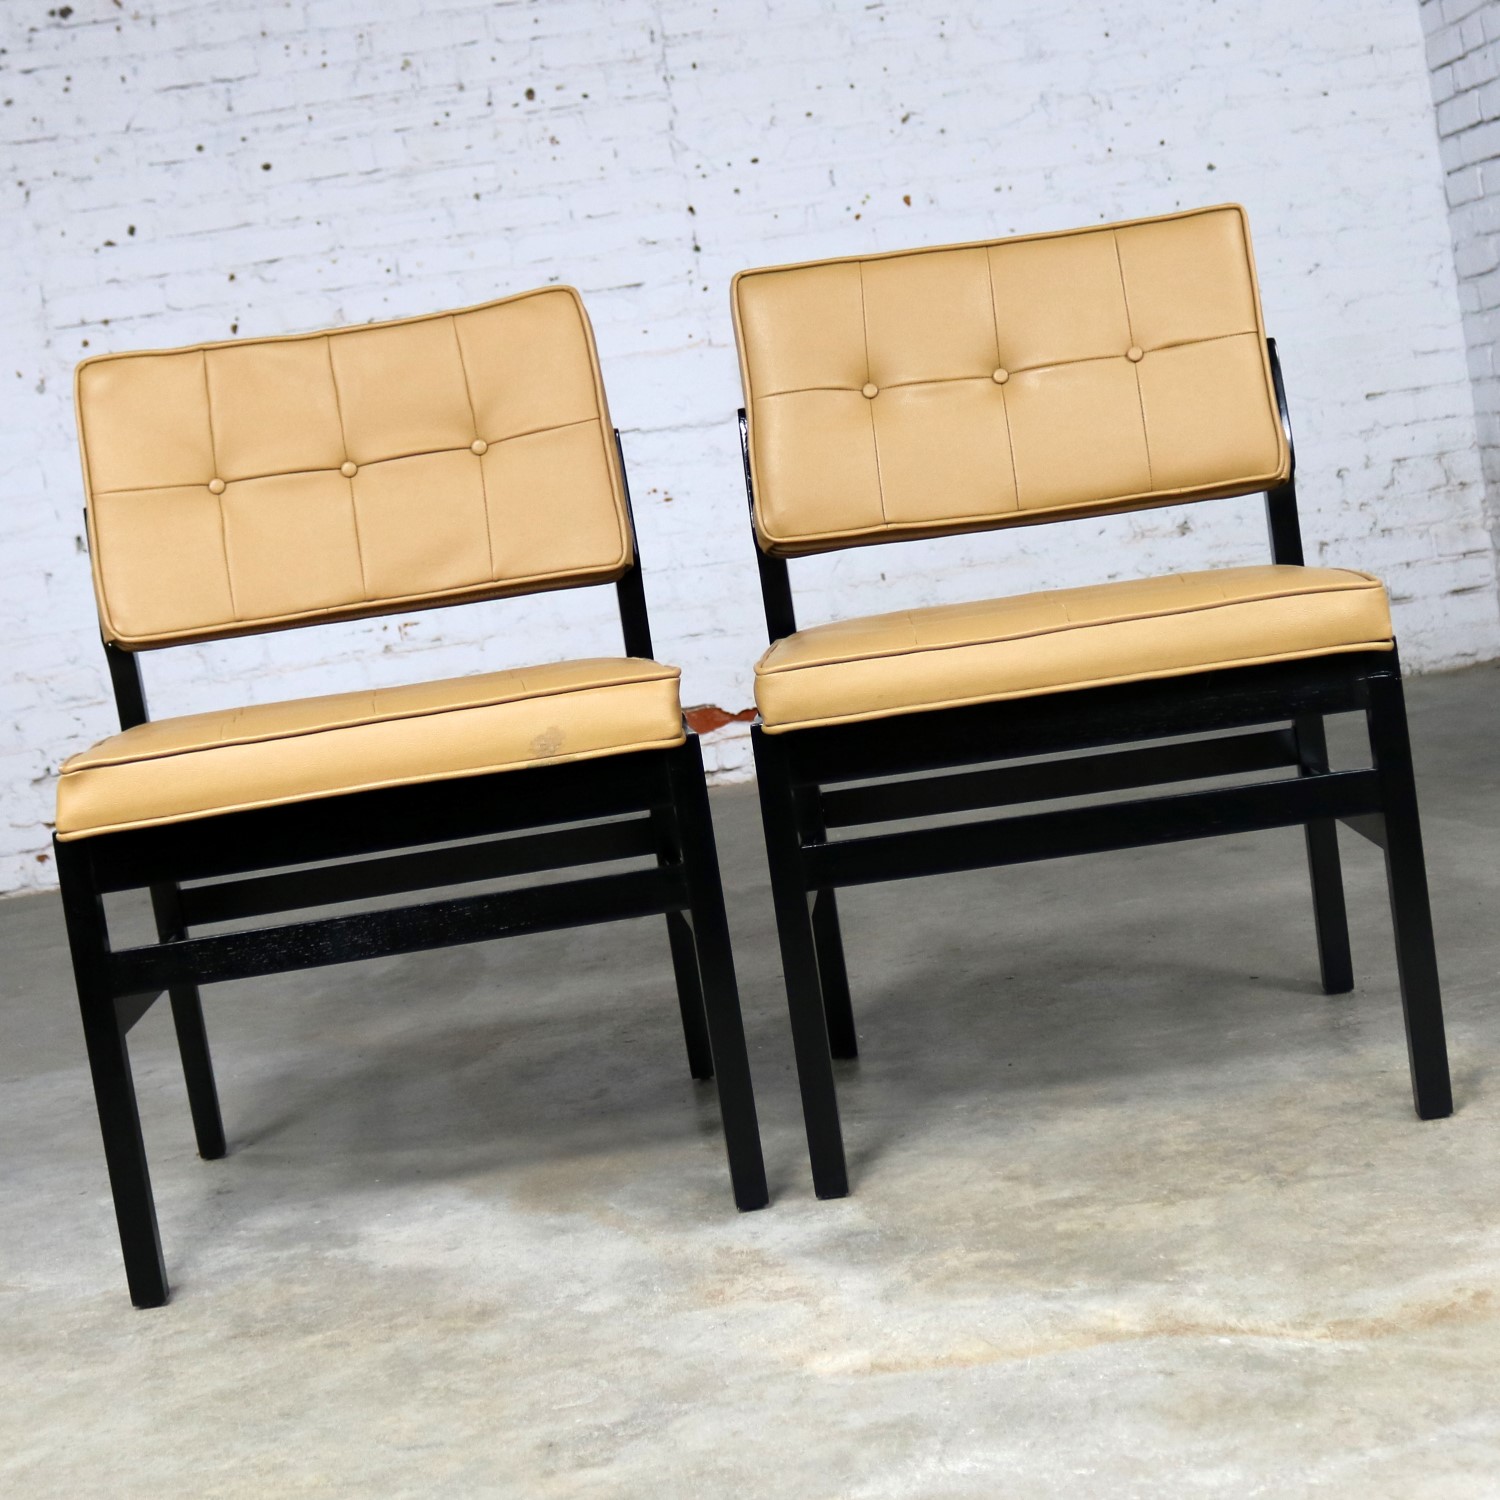 Pair Hibriten Ebonized Wood and Faux Leather Mid Century Modern Chairs